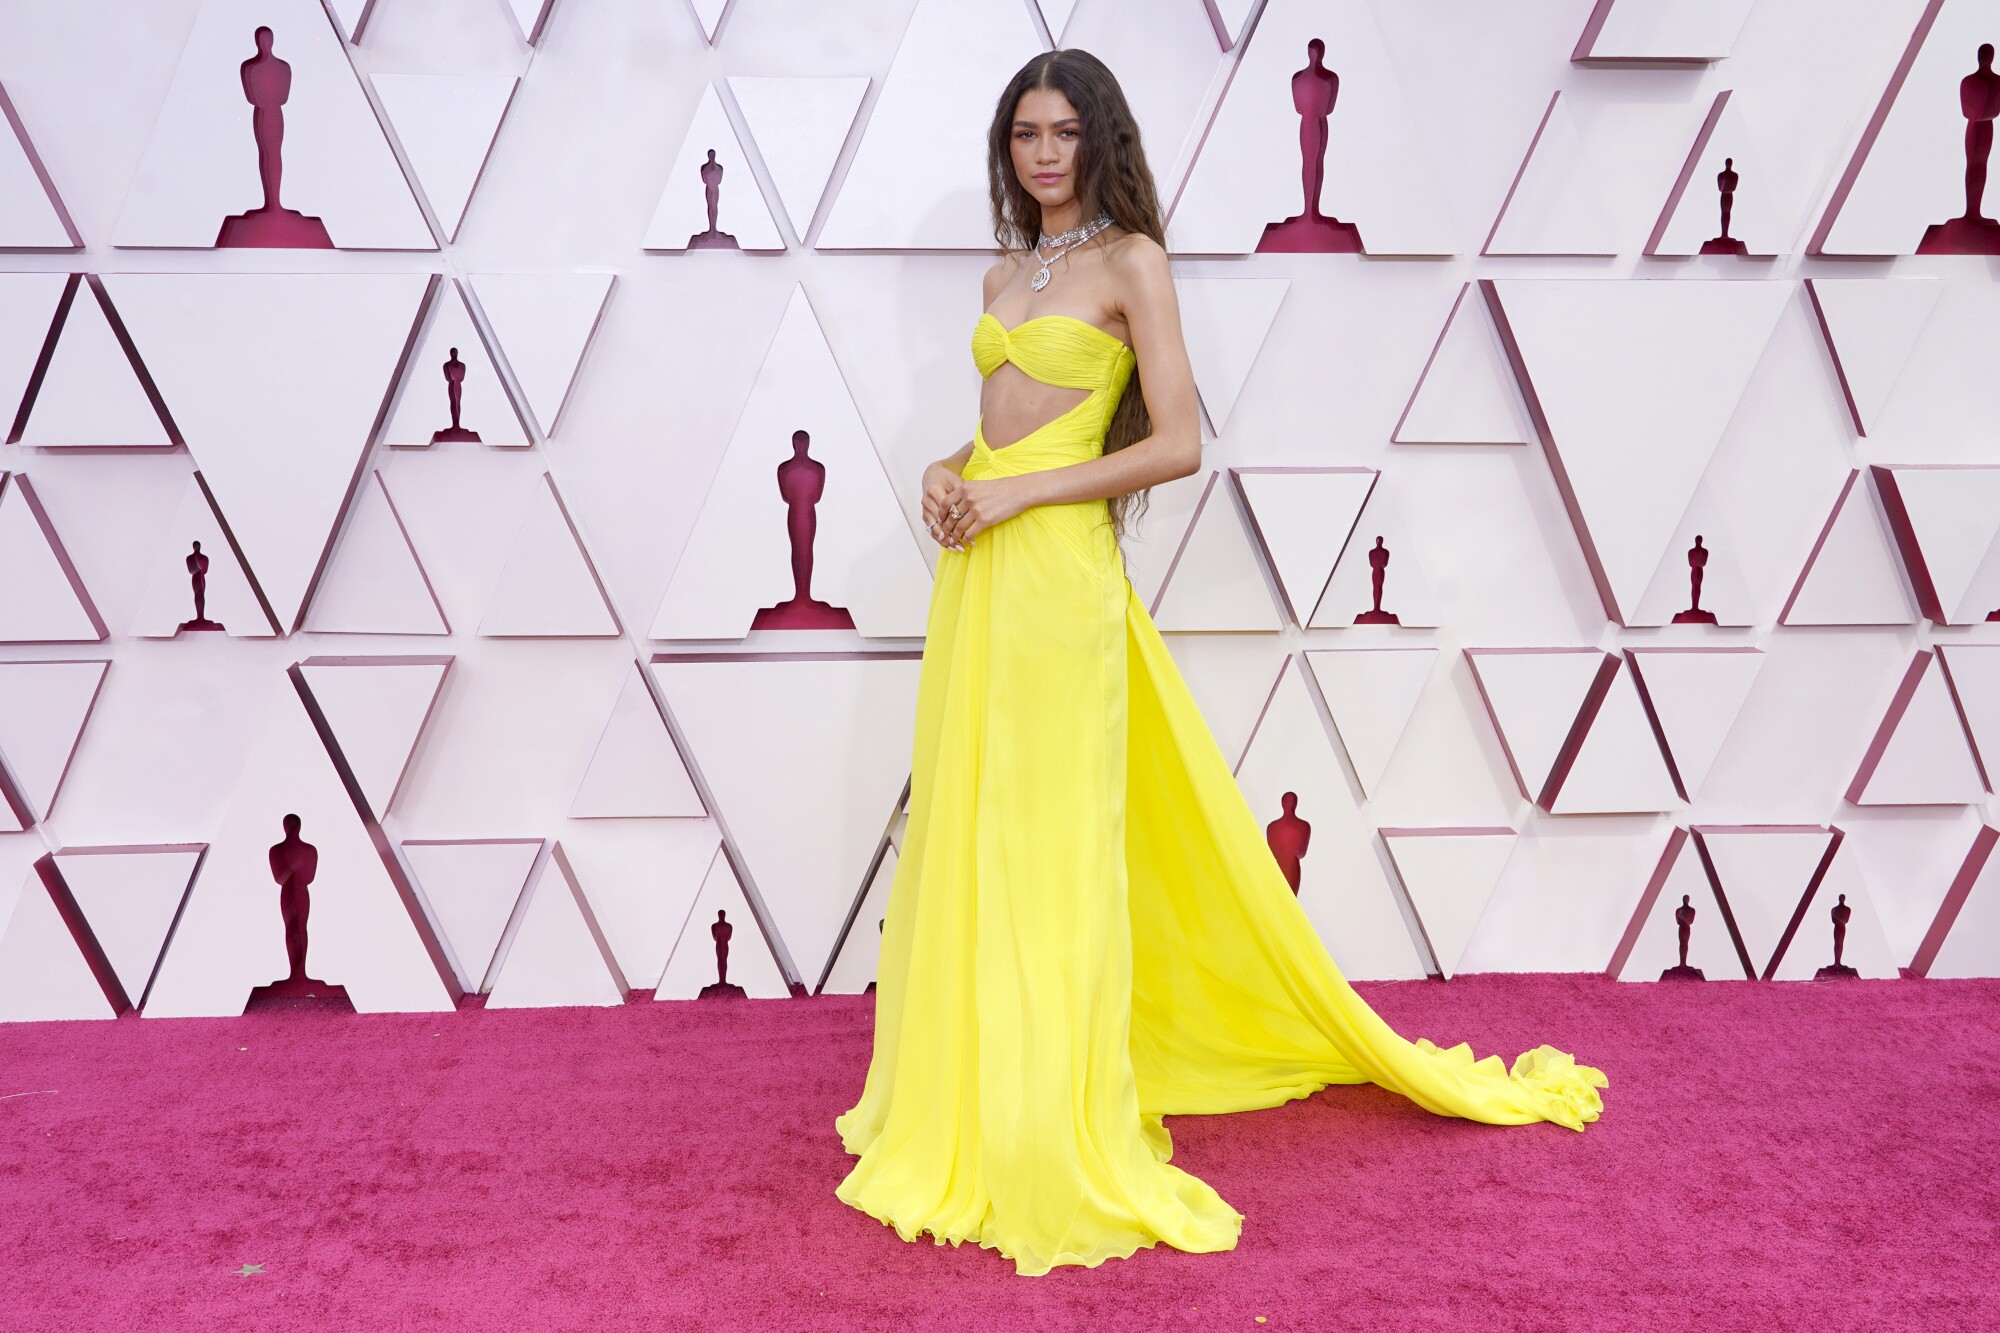 Zendaya in a yellow gown with exposed midriff